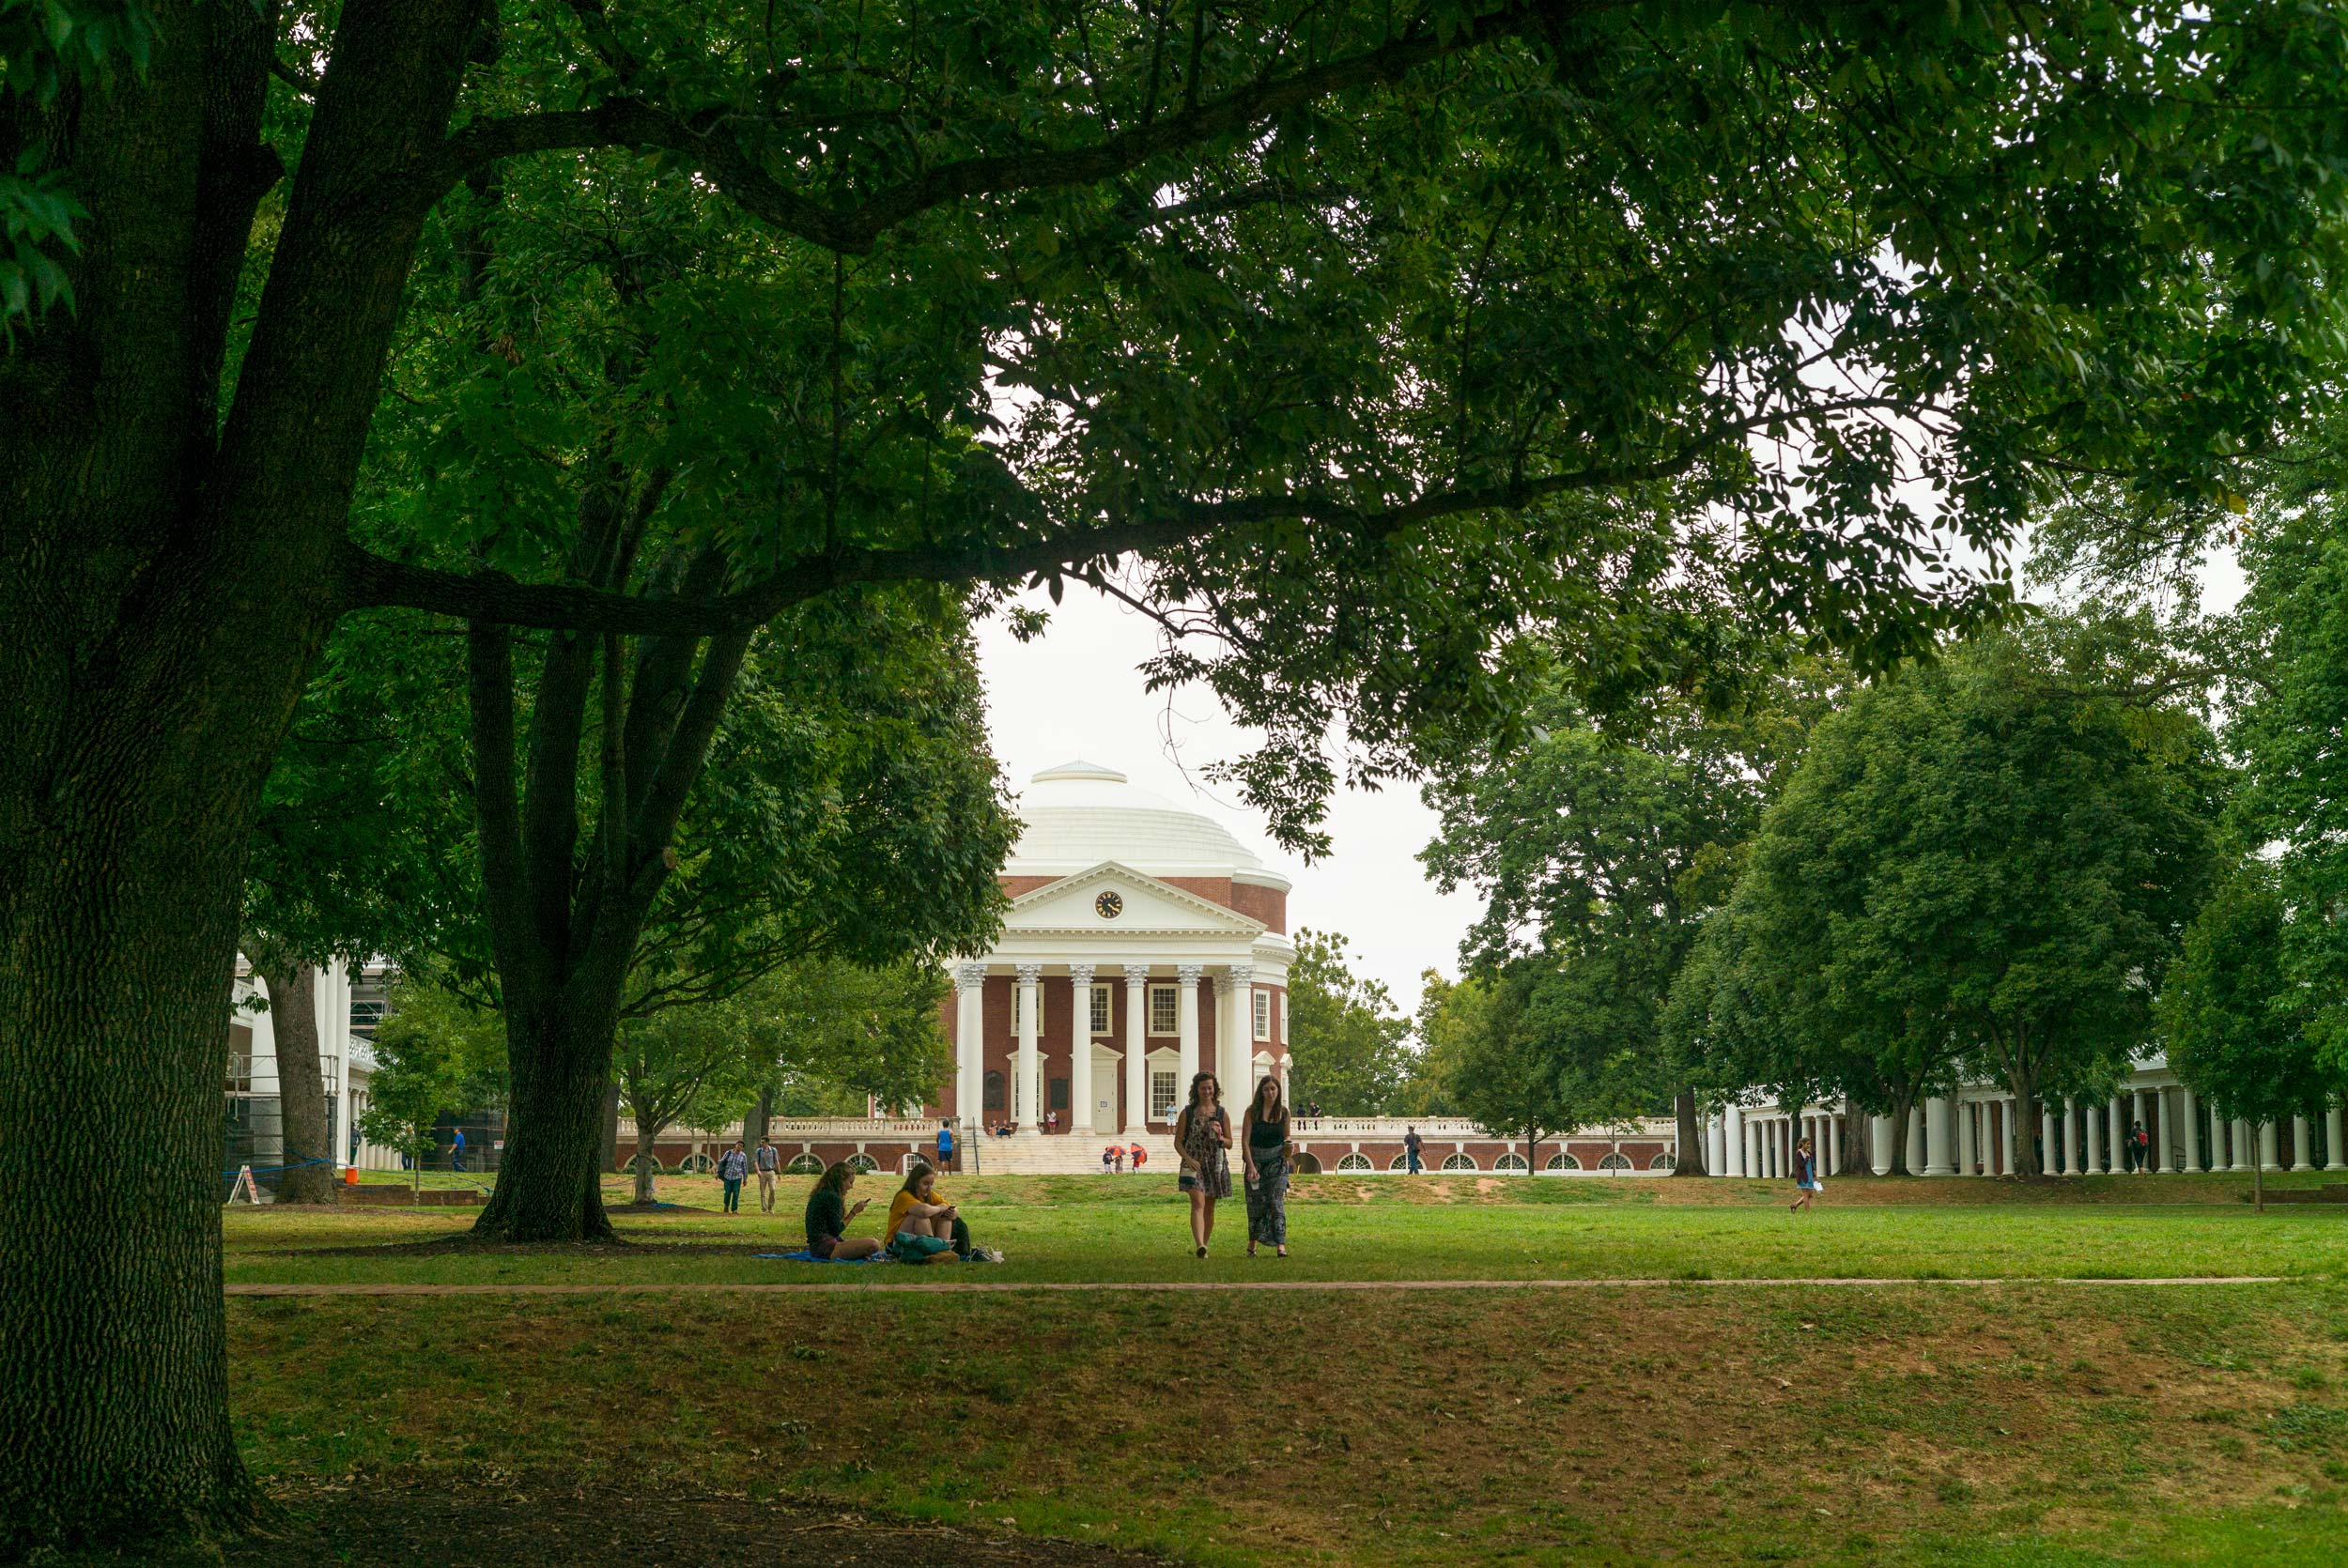 The Rotunda from the Lawn with green trees